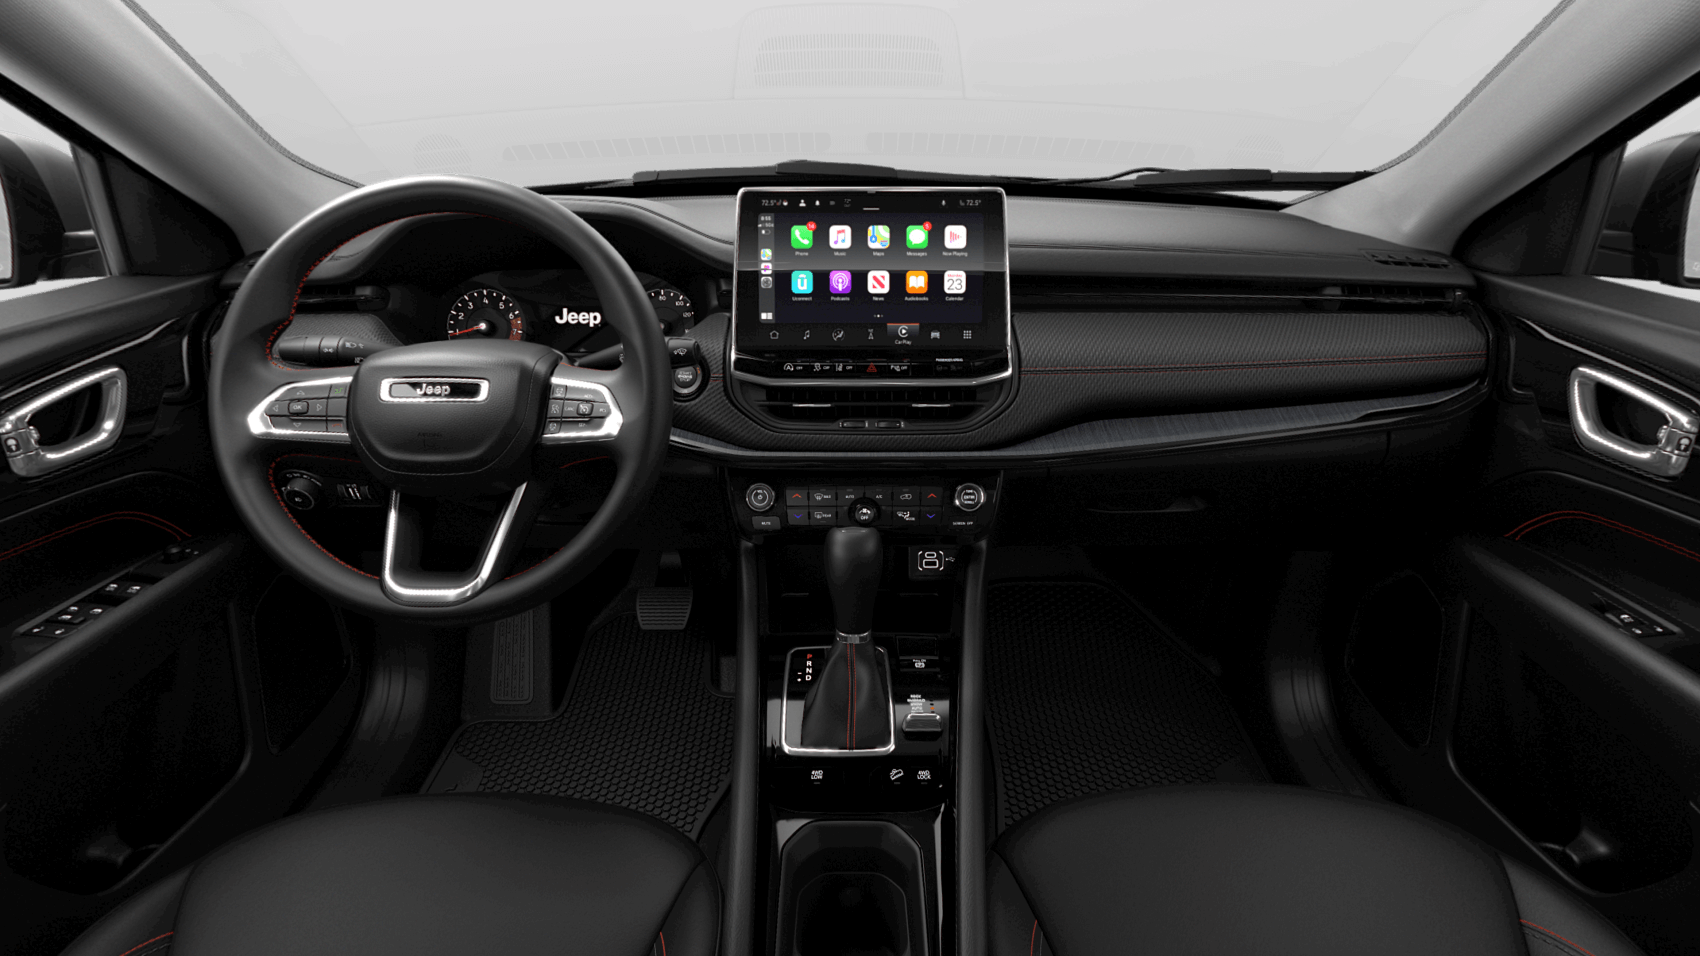 Technology of the Jeep Compass